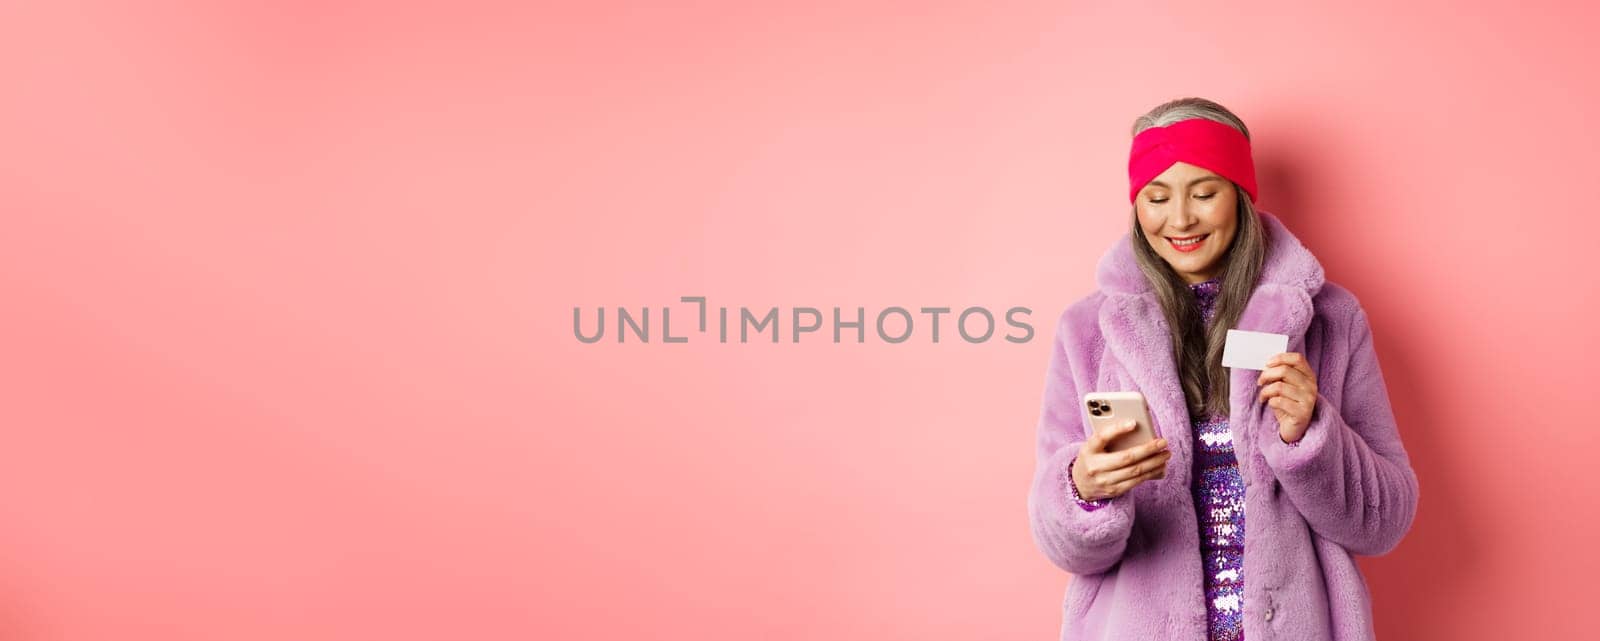 Online shopping and fashion concept. Stylish asian elderly woman standing in fashionable purple coat and making payment on smartphone, holding plastic credit card, pink background.